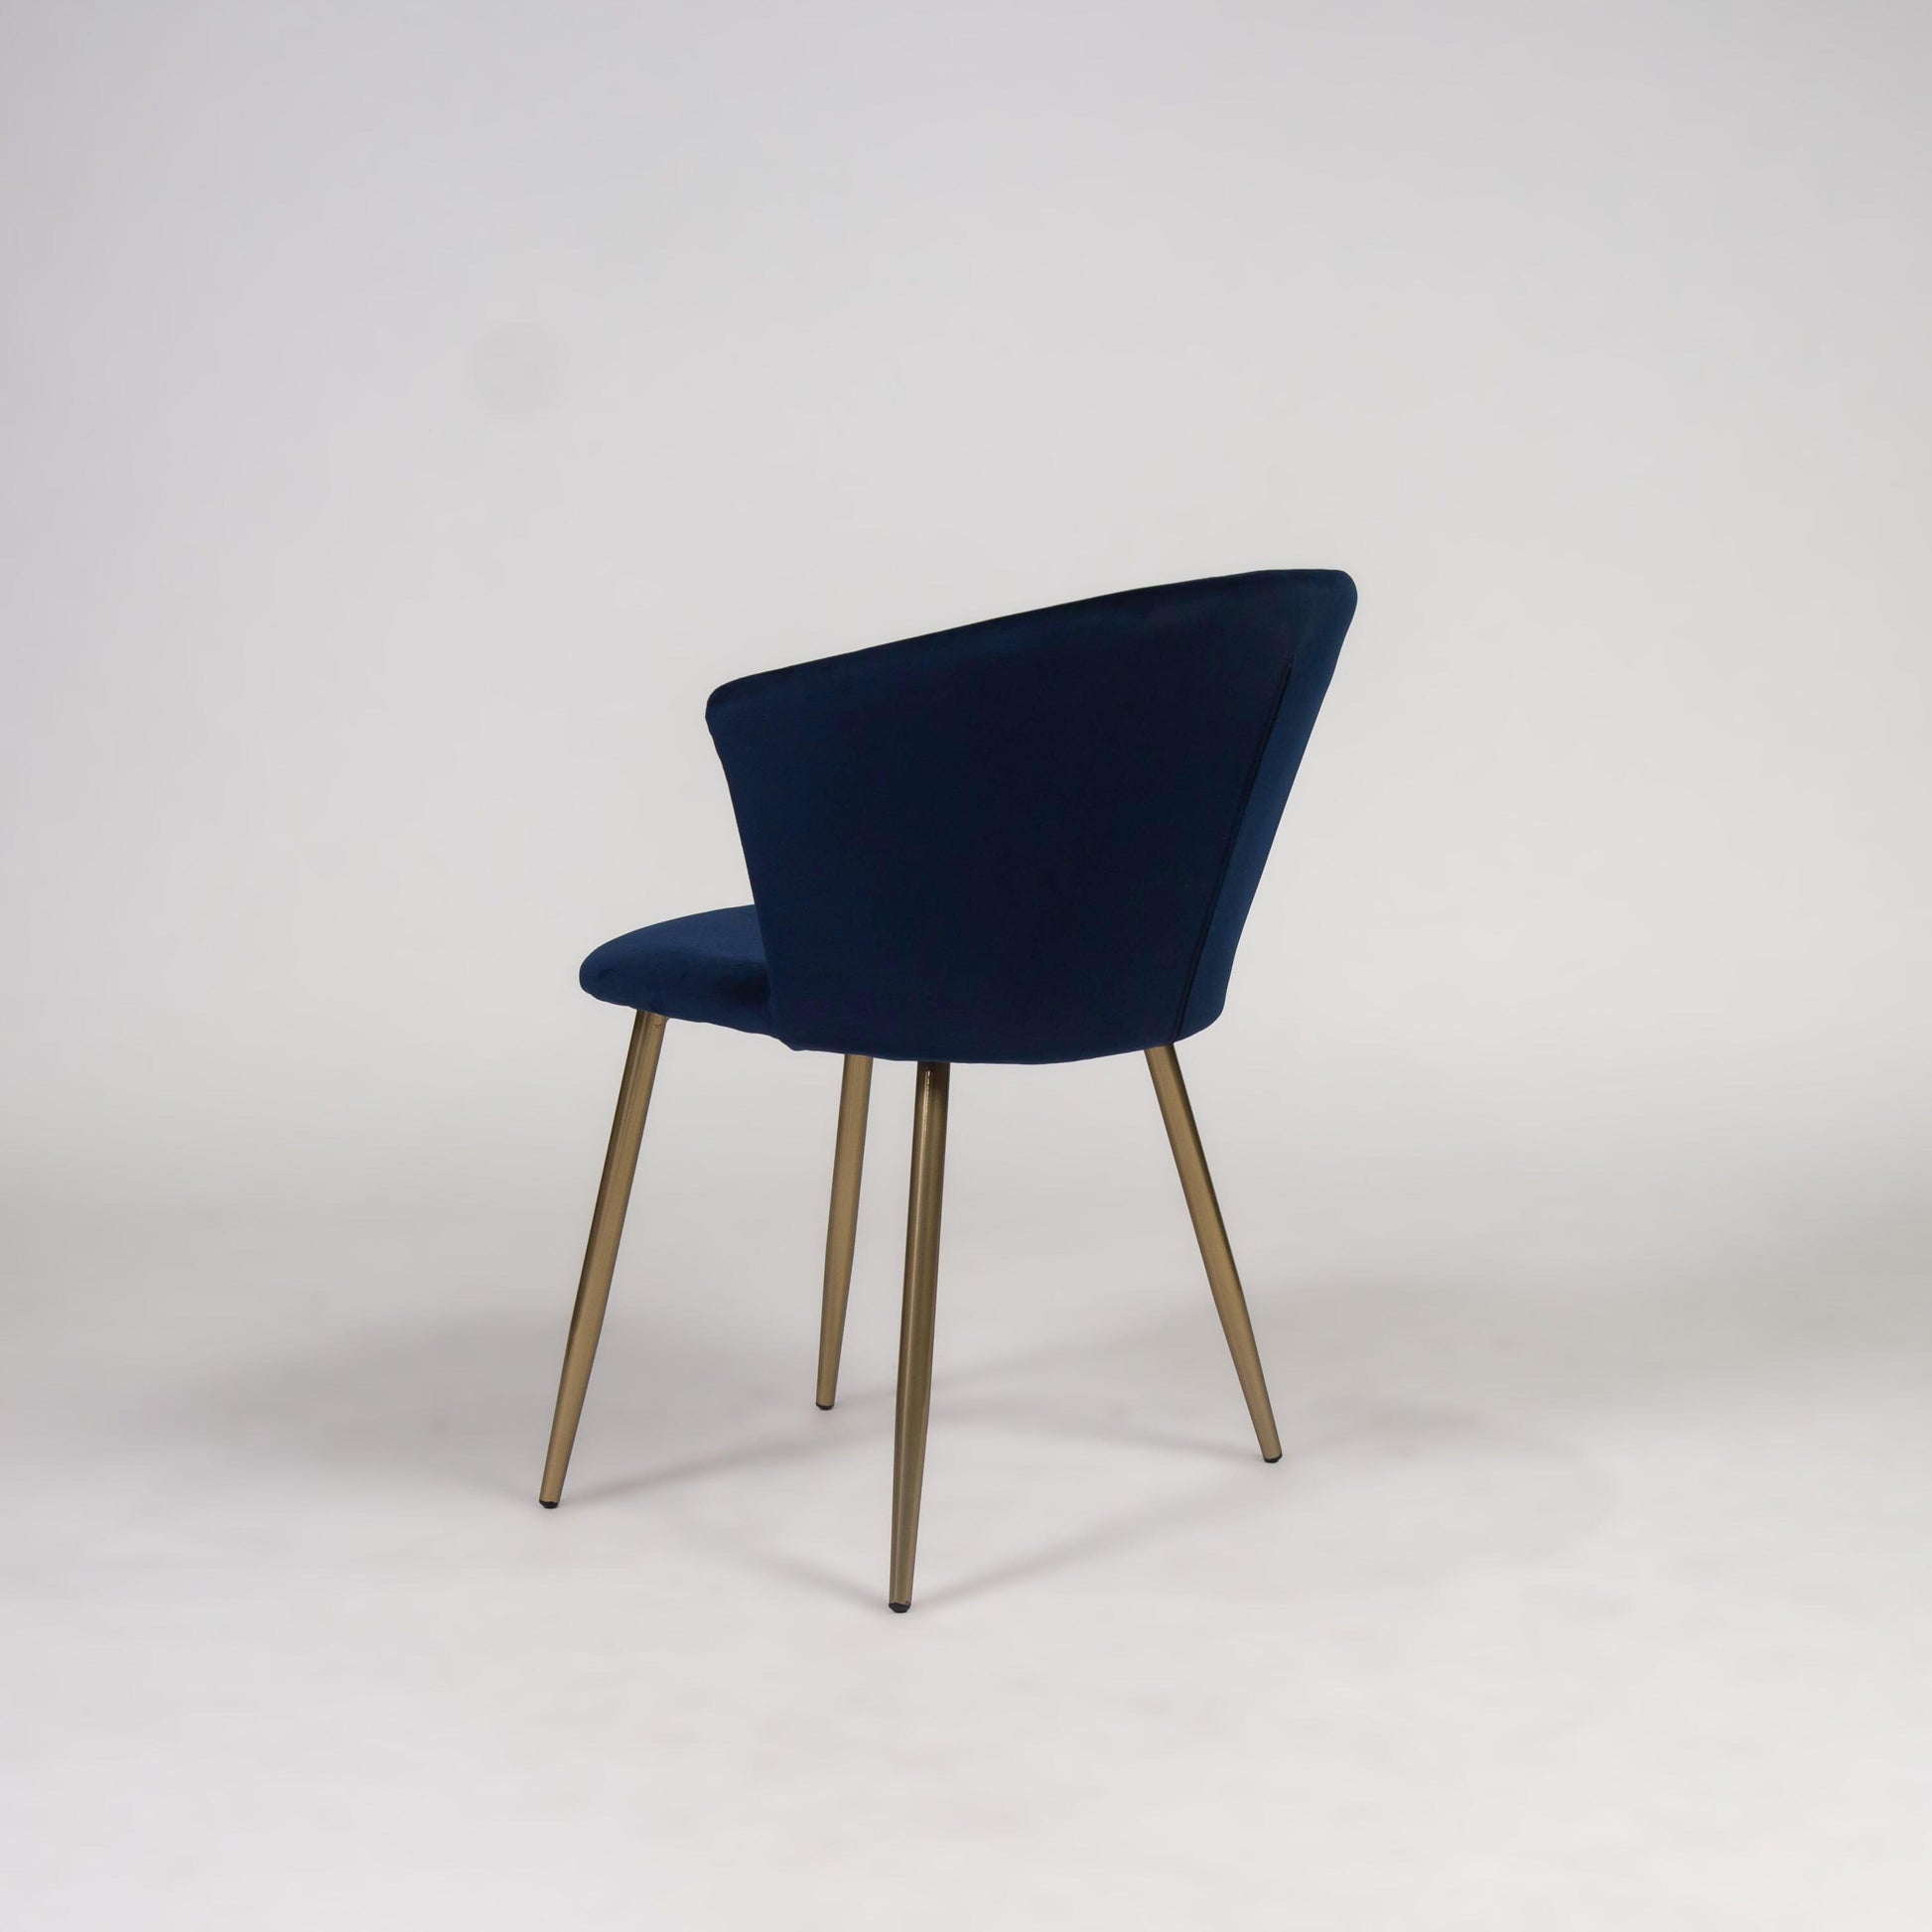 Cleo dining chairs - set of 2 - blue and gold - Laura James